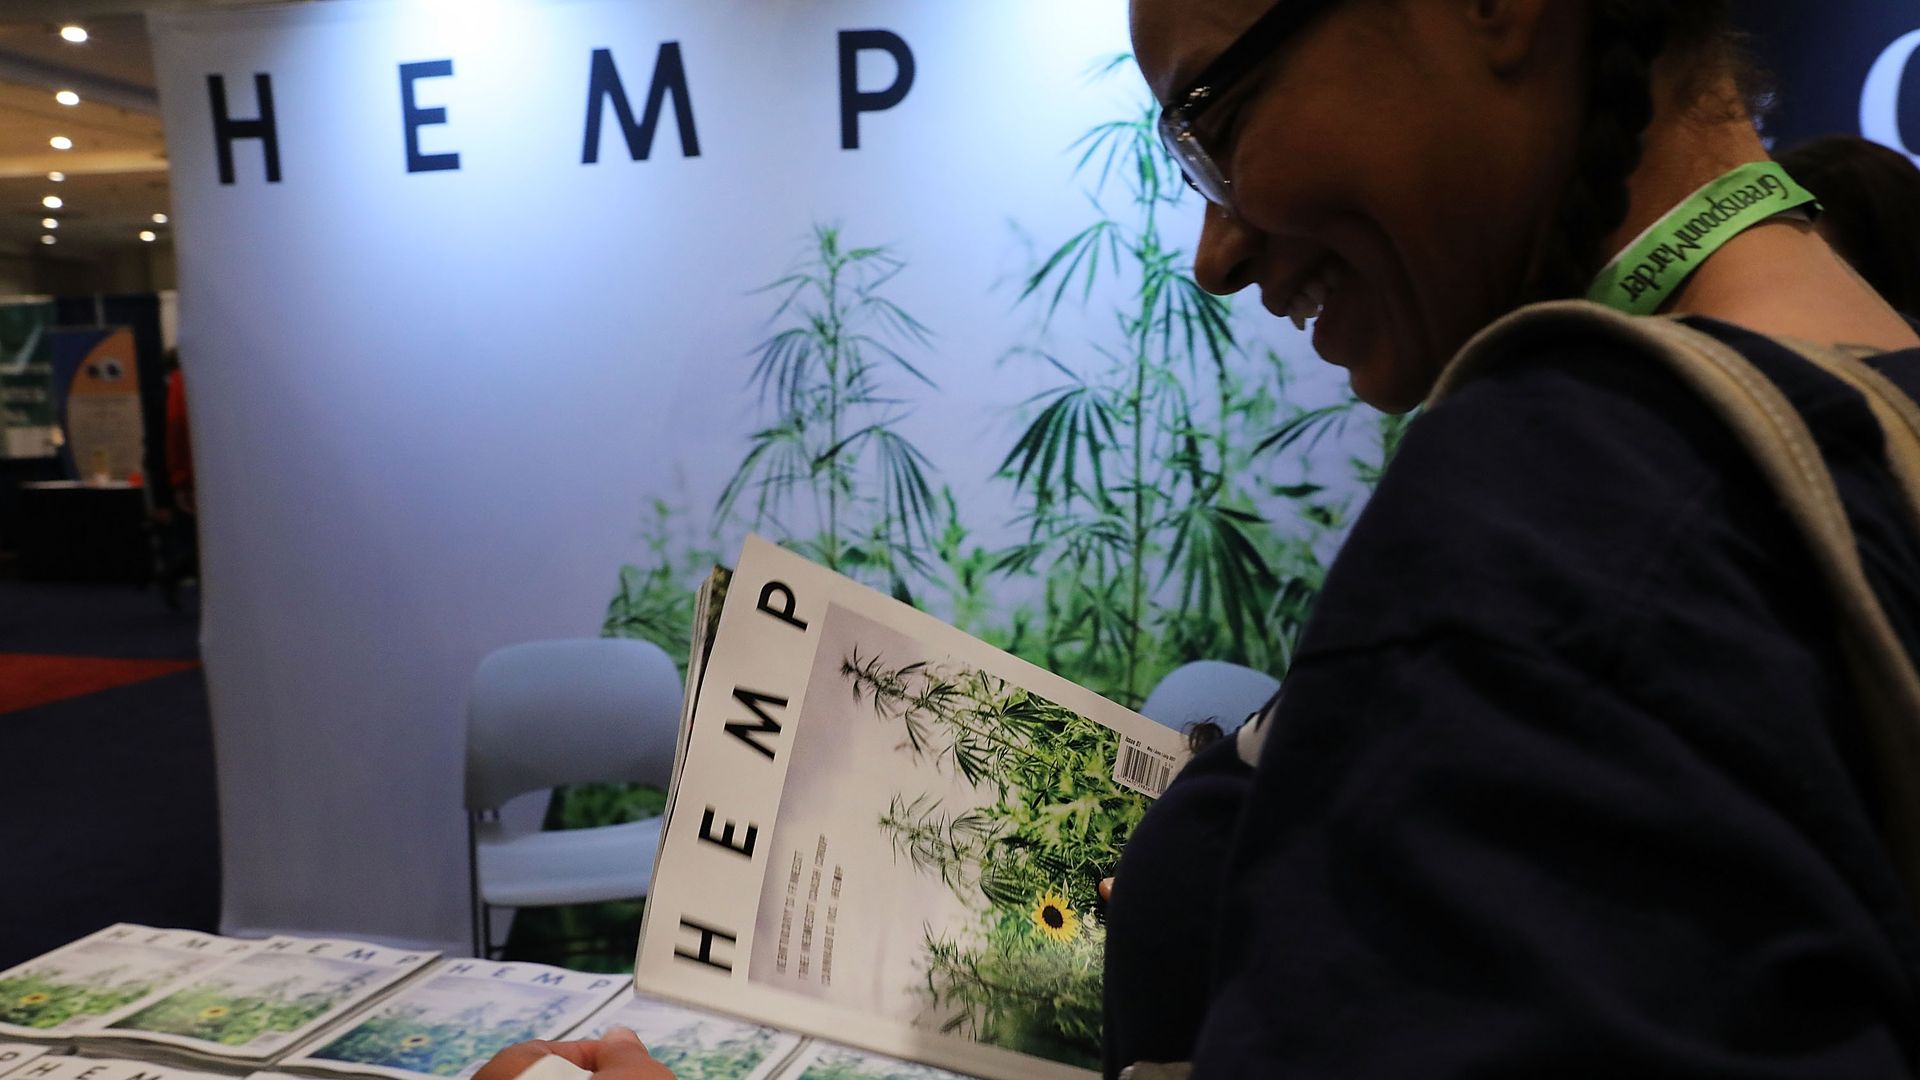 Signs and someone holding a magazine that says "hemp" on it